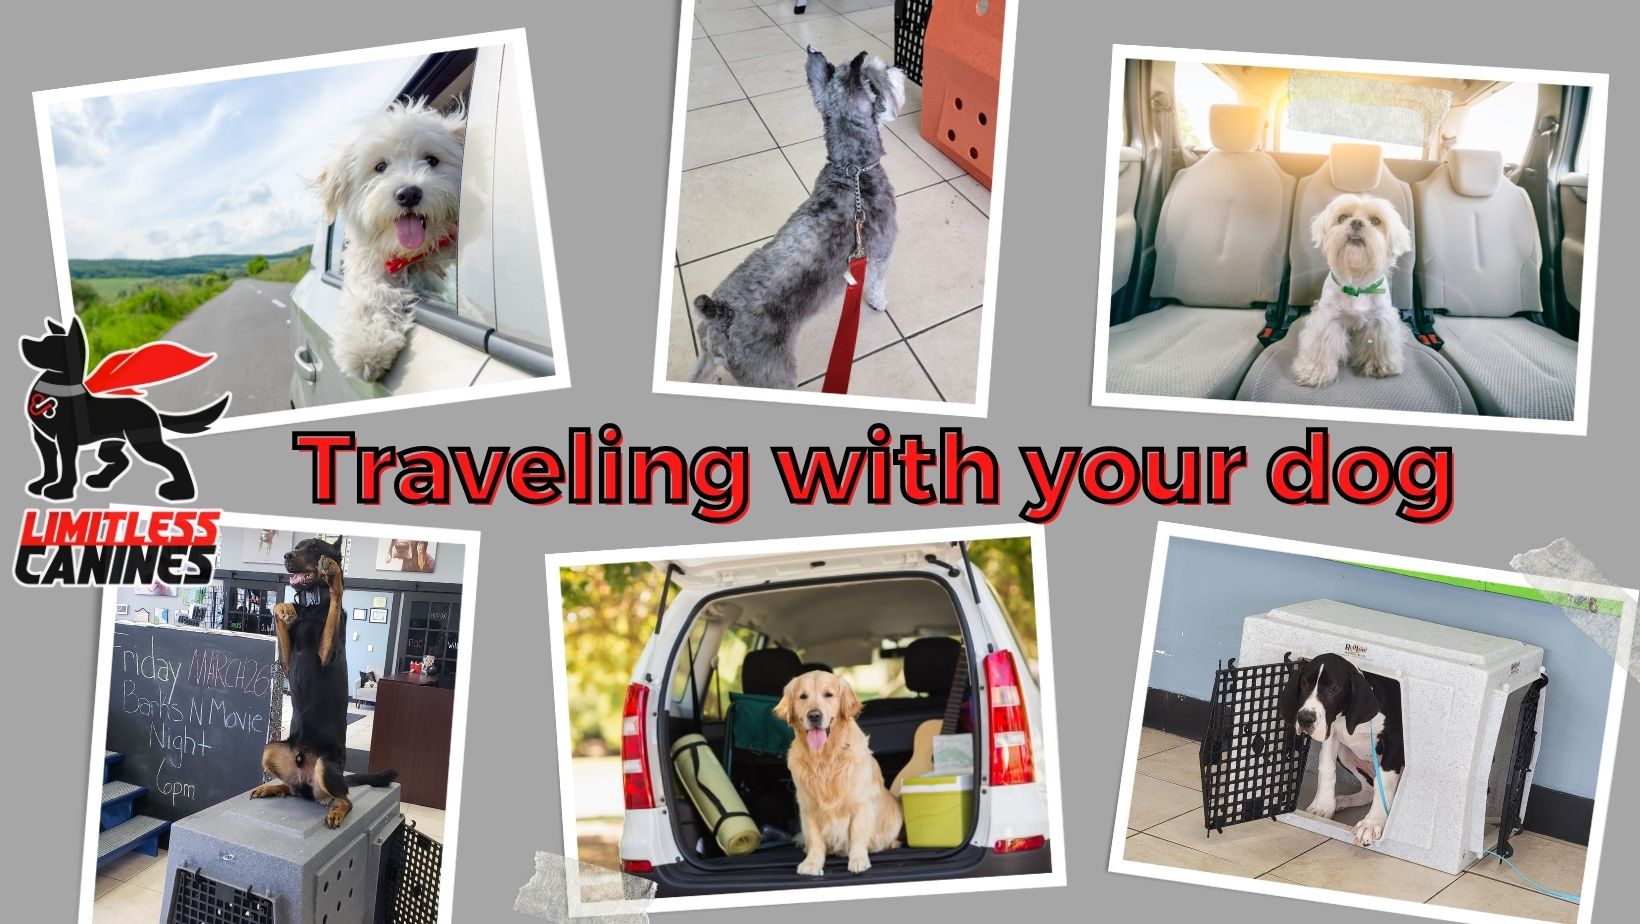 limitless canines traveling with your dog